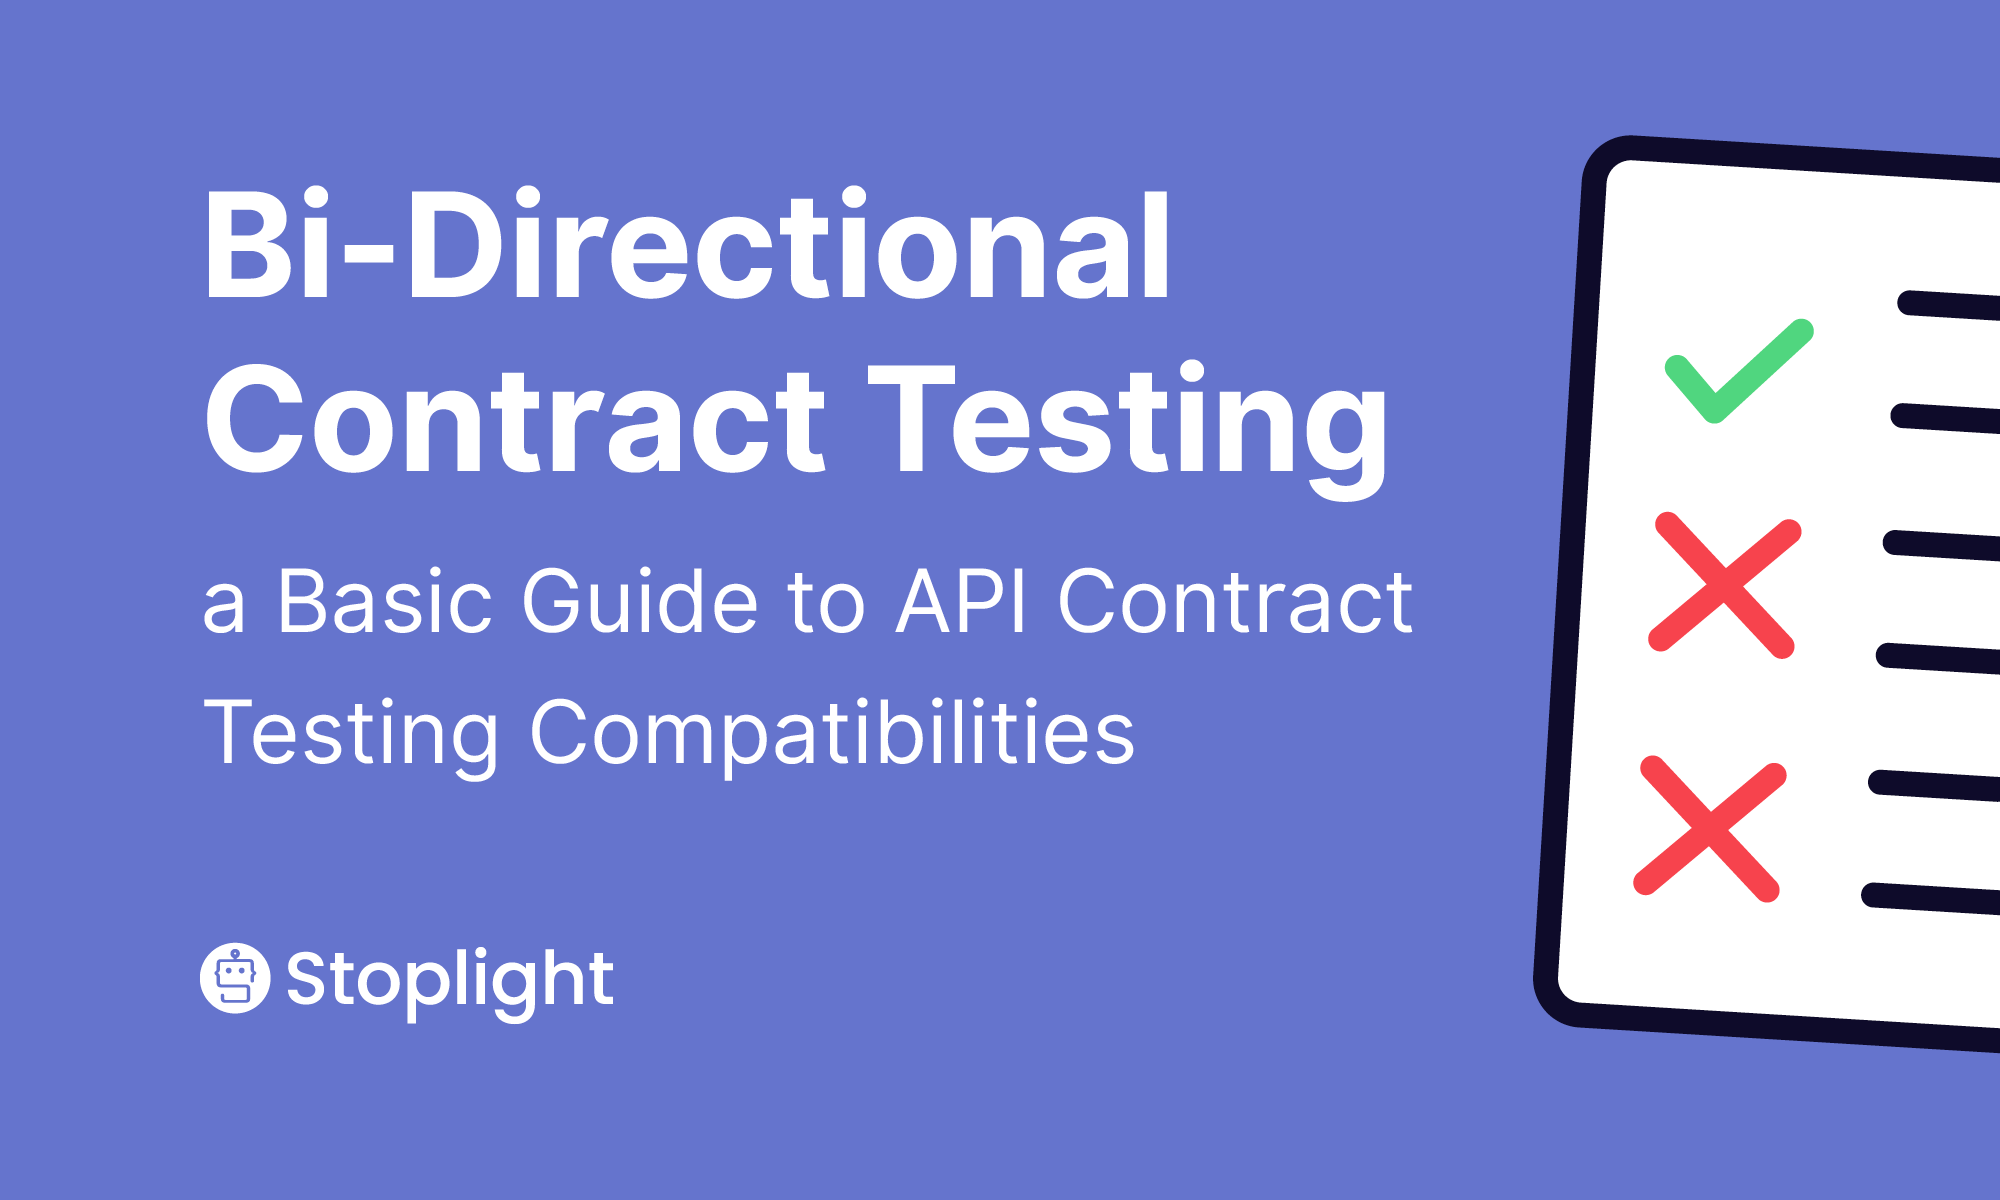 Bi-Directional Contract Testing: a Basic Guide to API Contract Testing Compatibilities